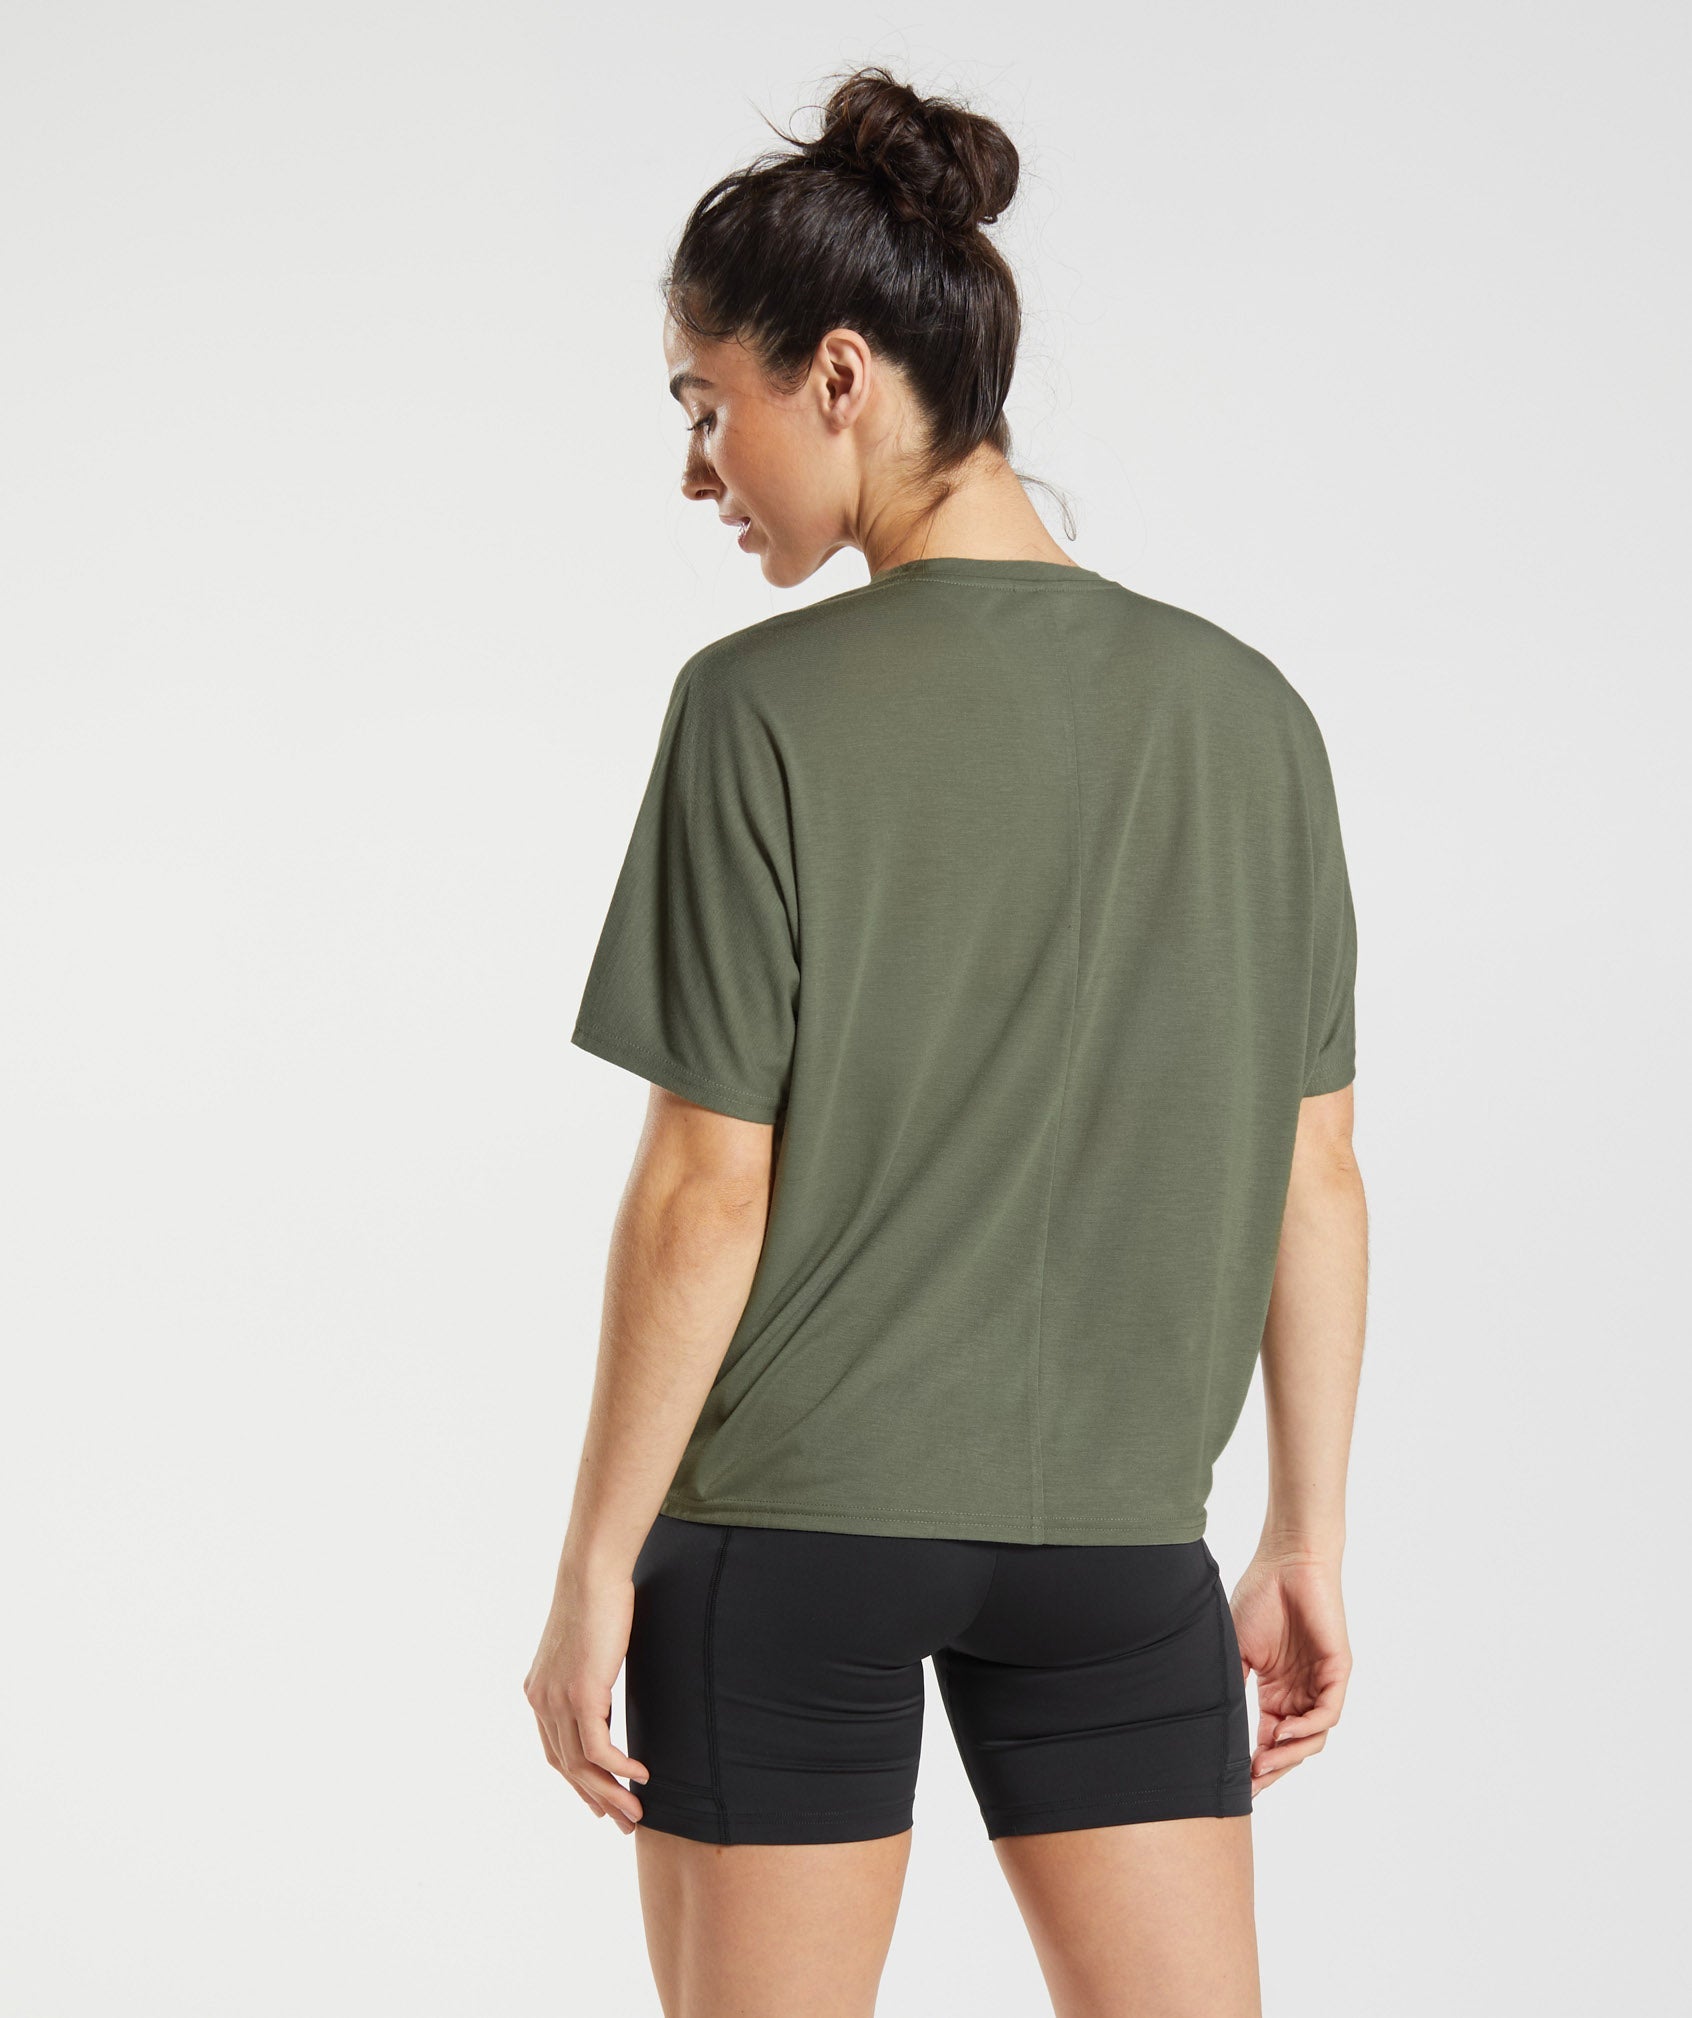 Super Soft T-Shirt in Dusty Olive - view 2